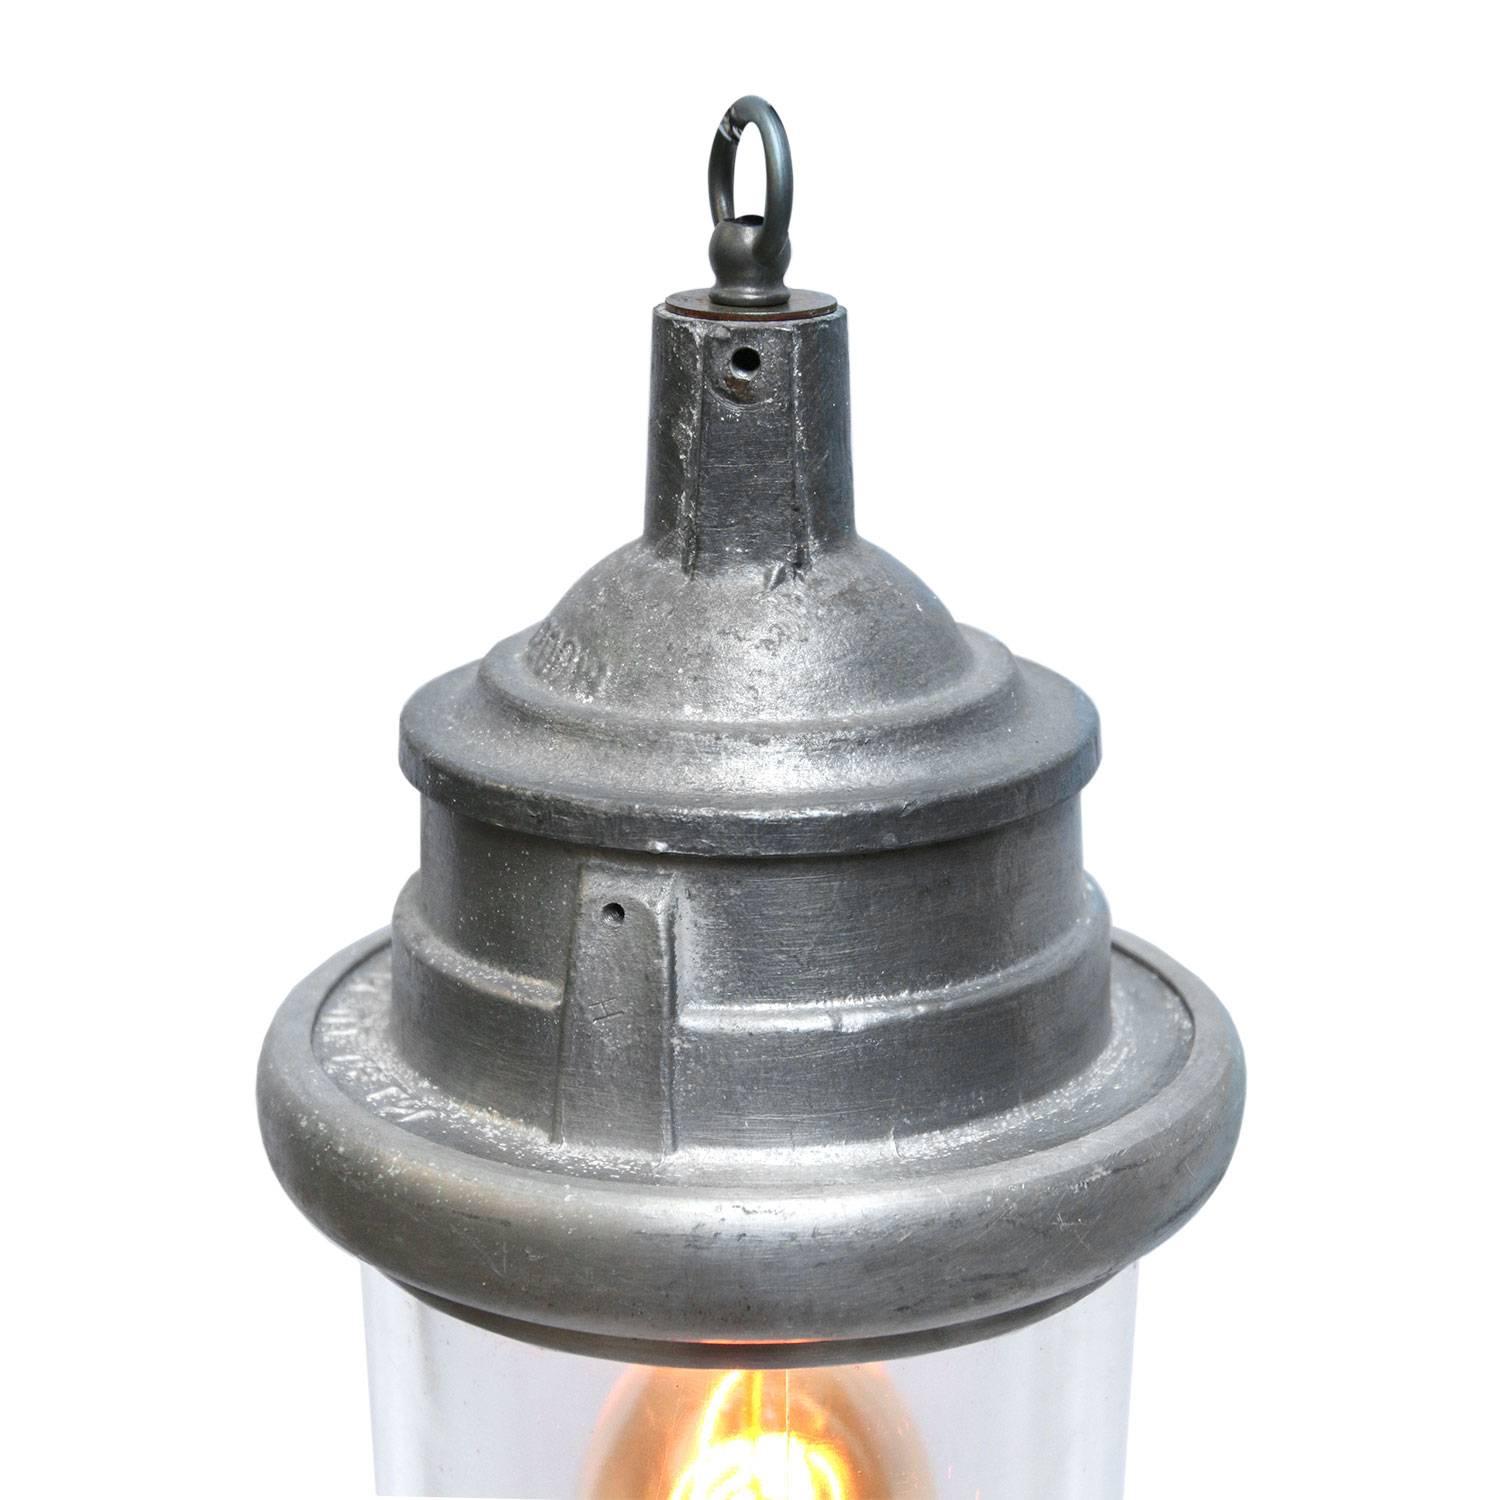 Ukrainian Industrial hanging lamp. Silver gray cast aluminium. Clear glass.

Priced per individual item. All lamps have been made suitable by international standards for incandescent light bulbs, energy-efficient and LED bulbs. E26/E27 bulb